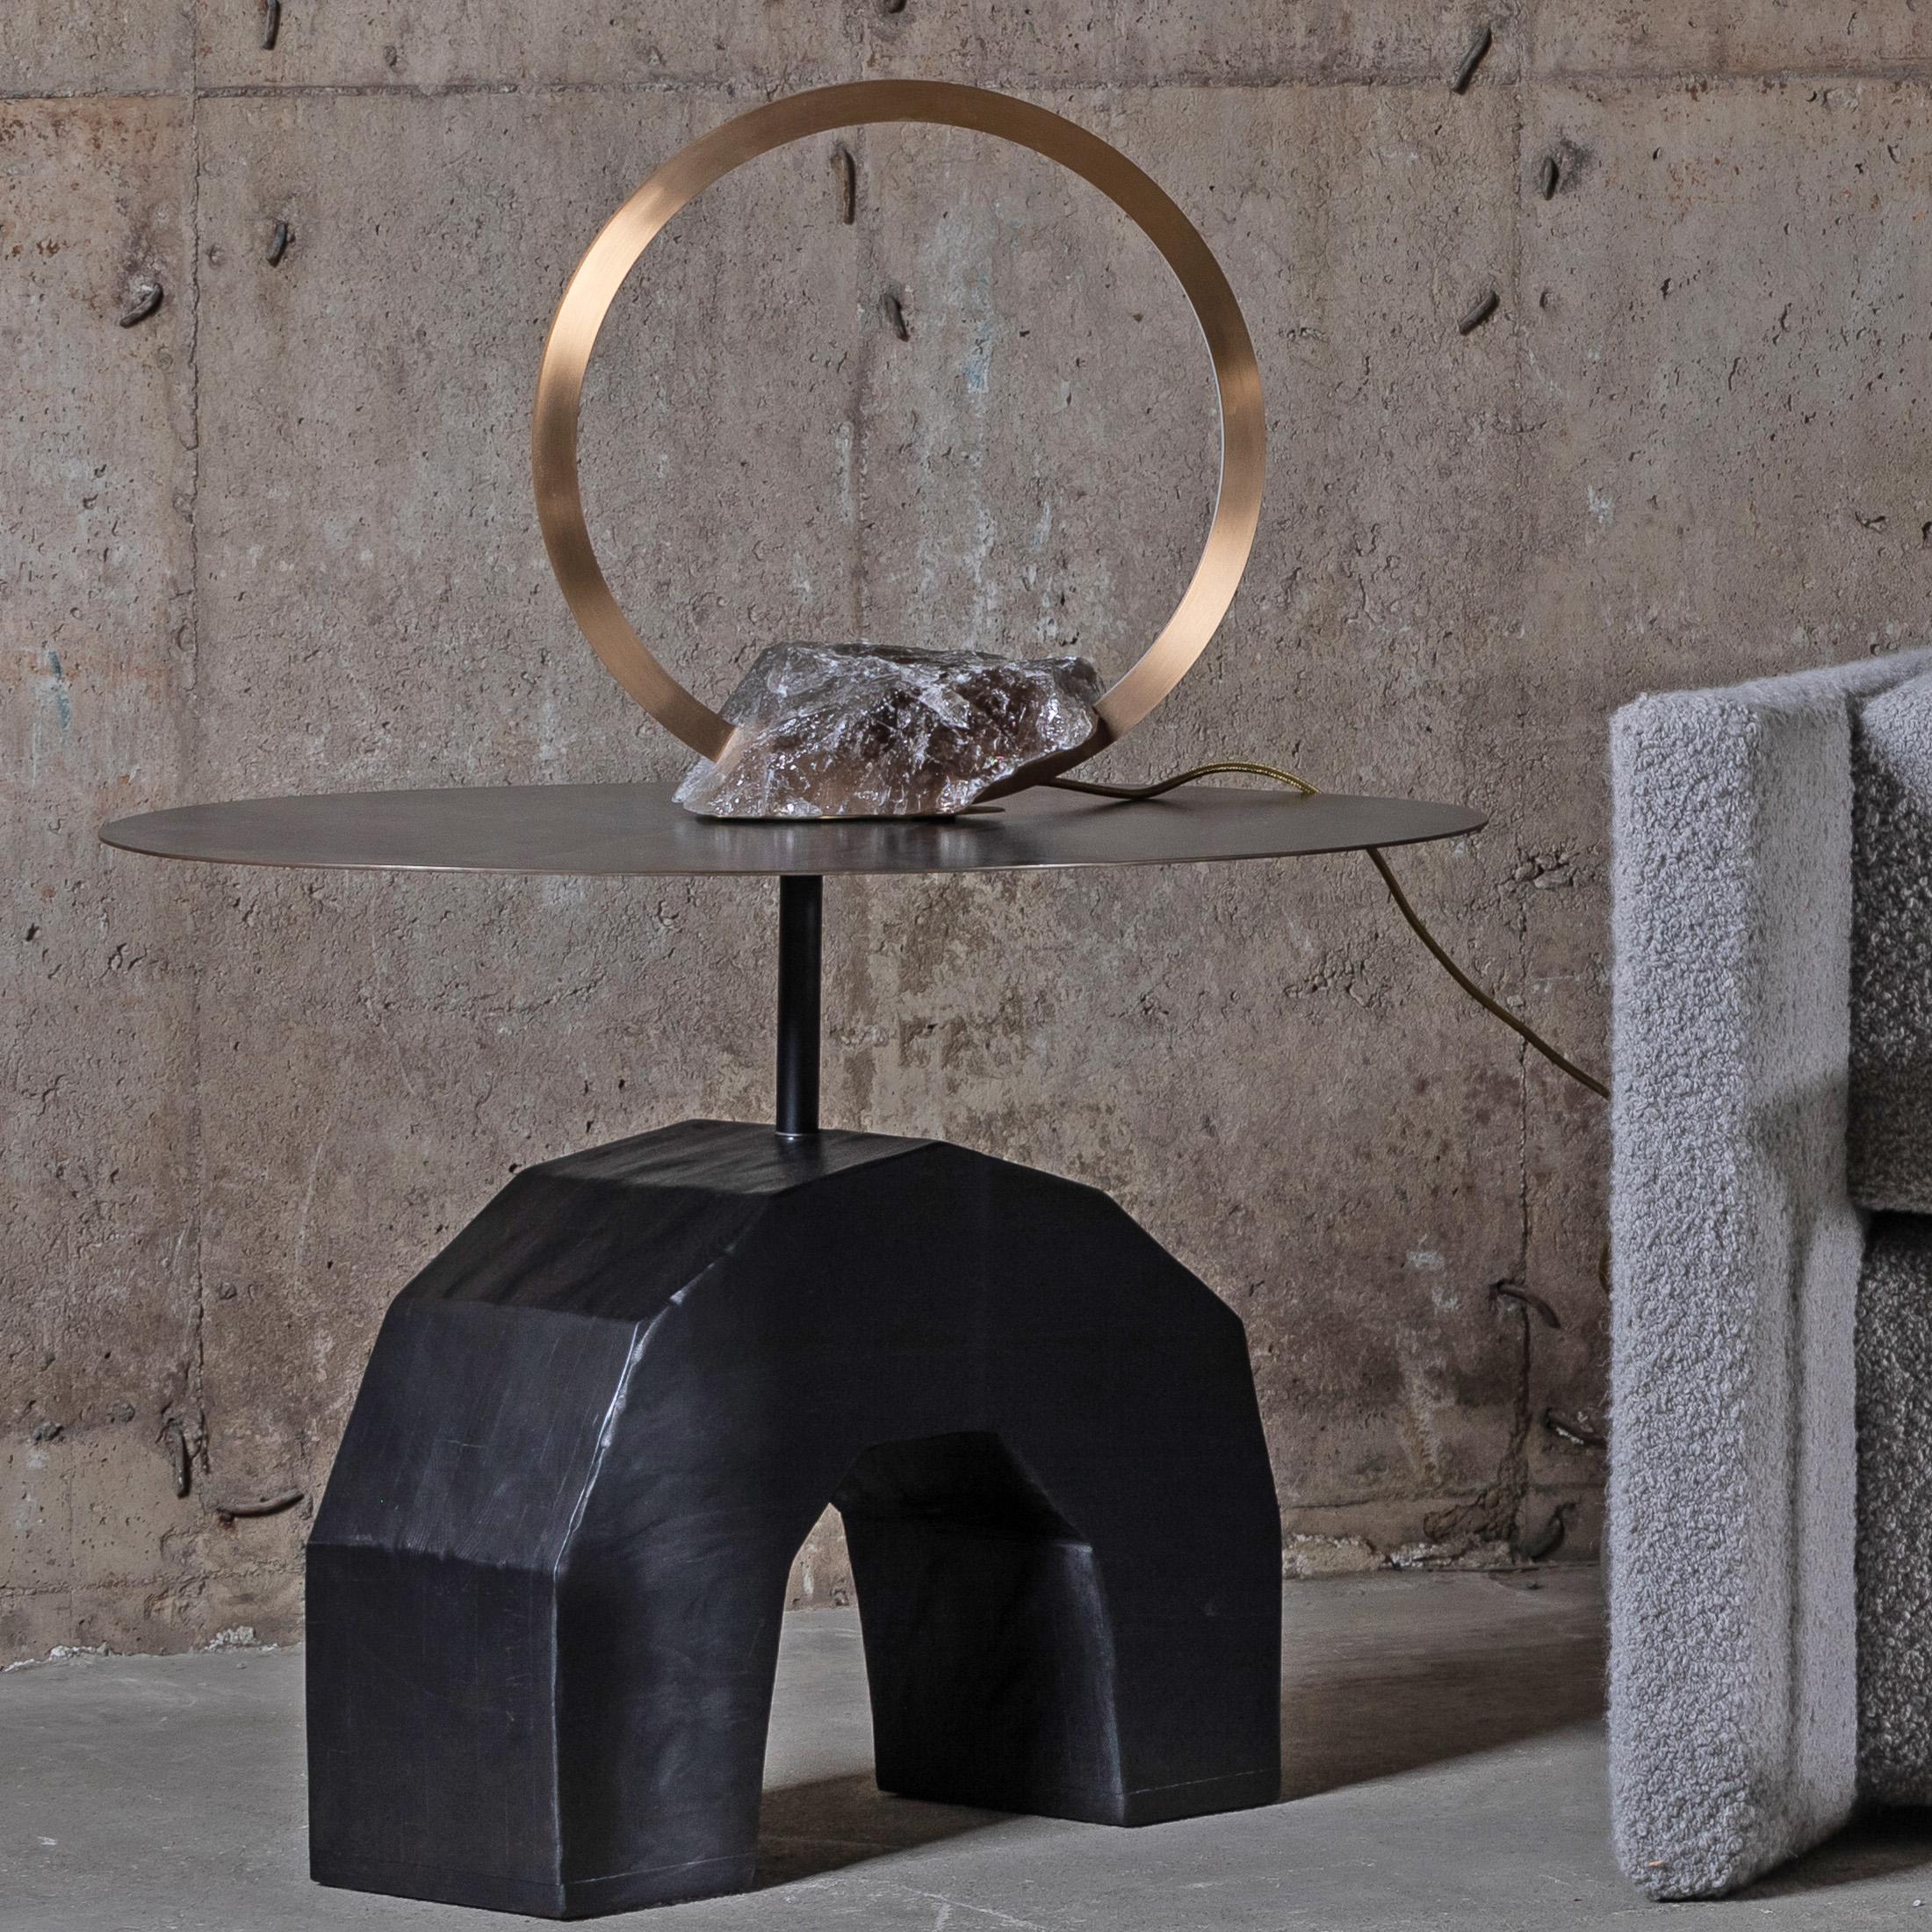 Contemporary table light sculpture in brass with quartz base, Portal 450 by Christopher Boots

Emanating luminescence from a minimalist form, Portal table lamp embodies the cyclical nature of existence.

Looking through Portal table lamp one is